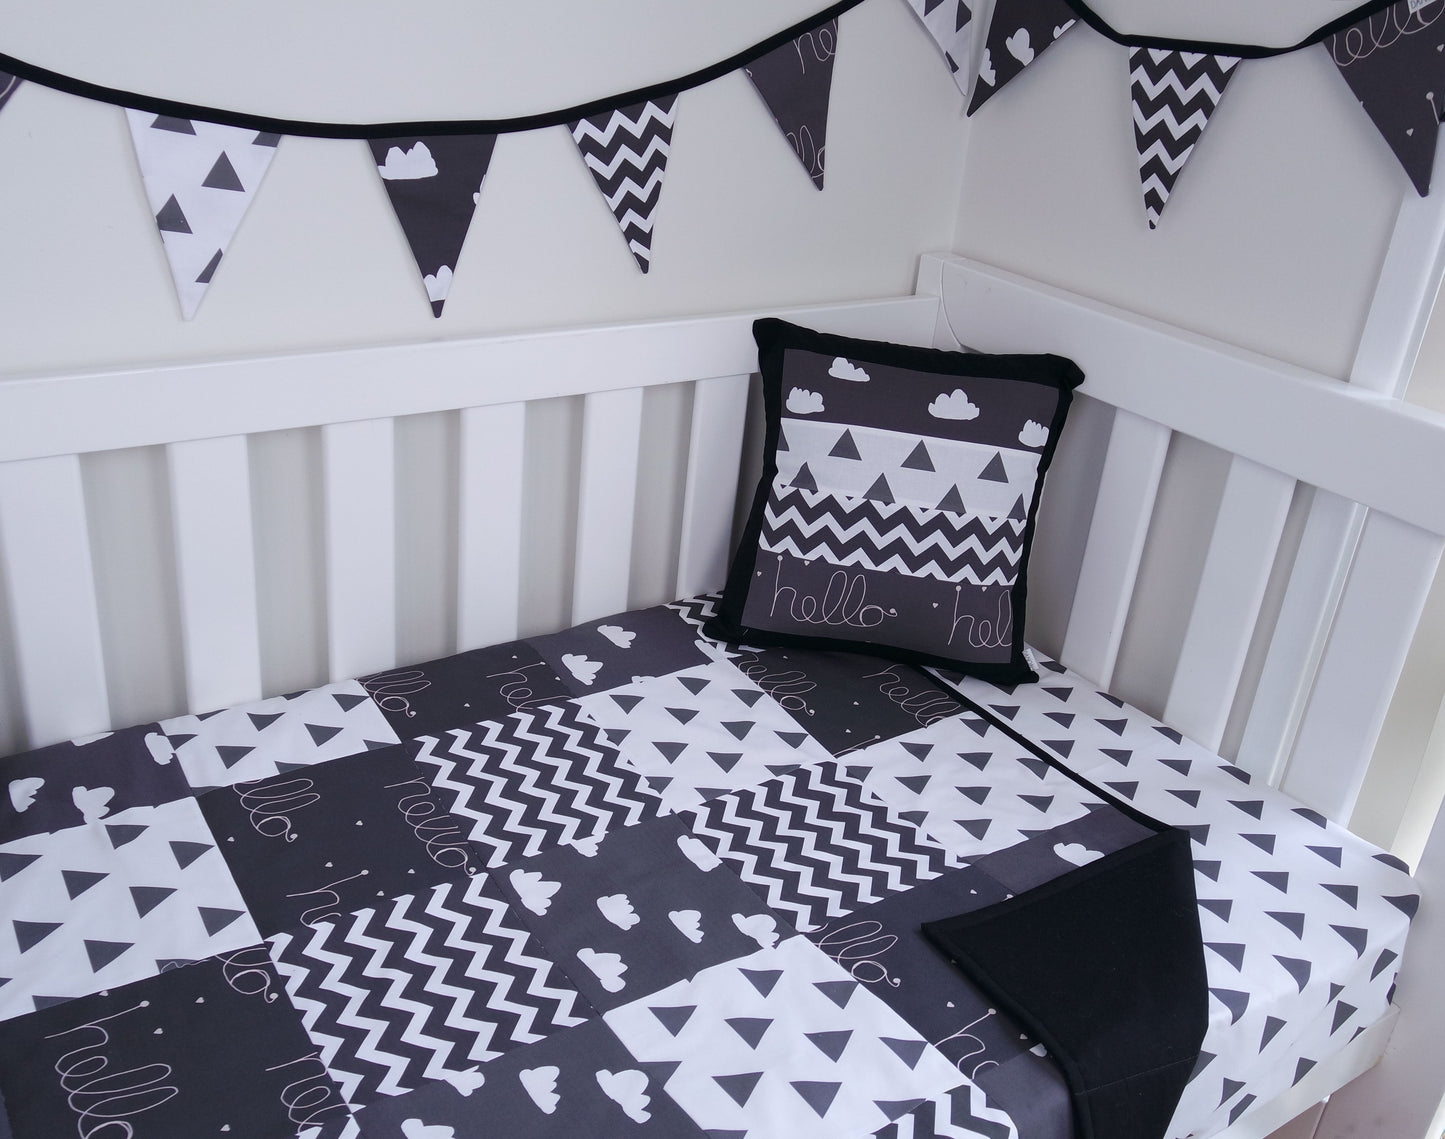 Black & White Hello Clouds Bunting Flags